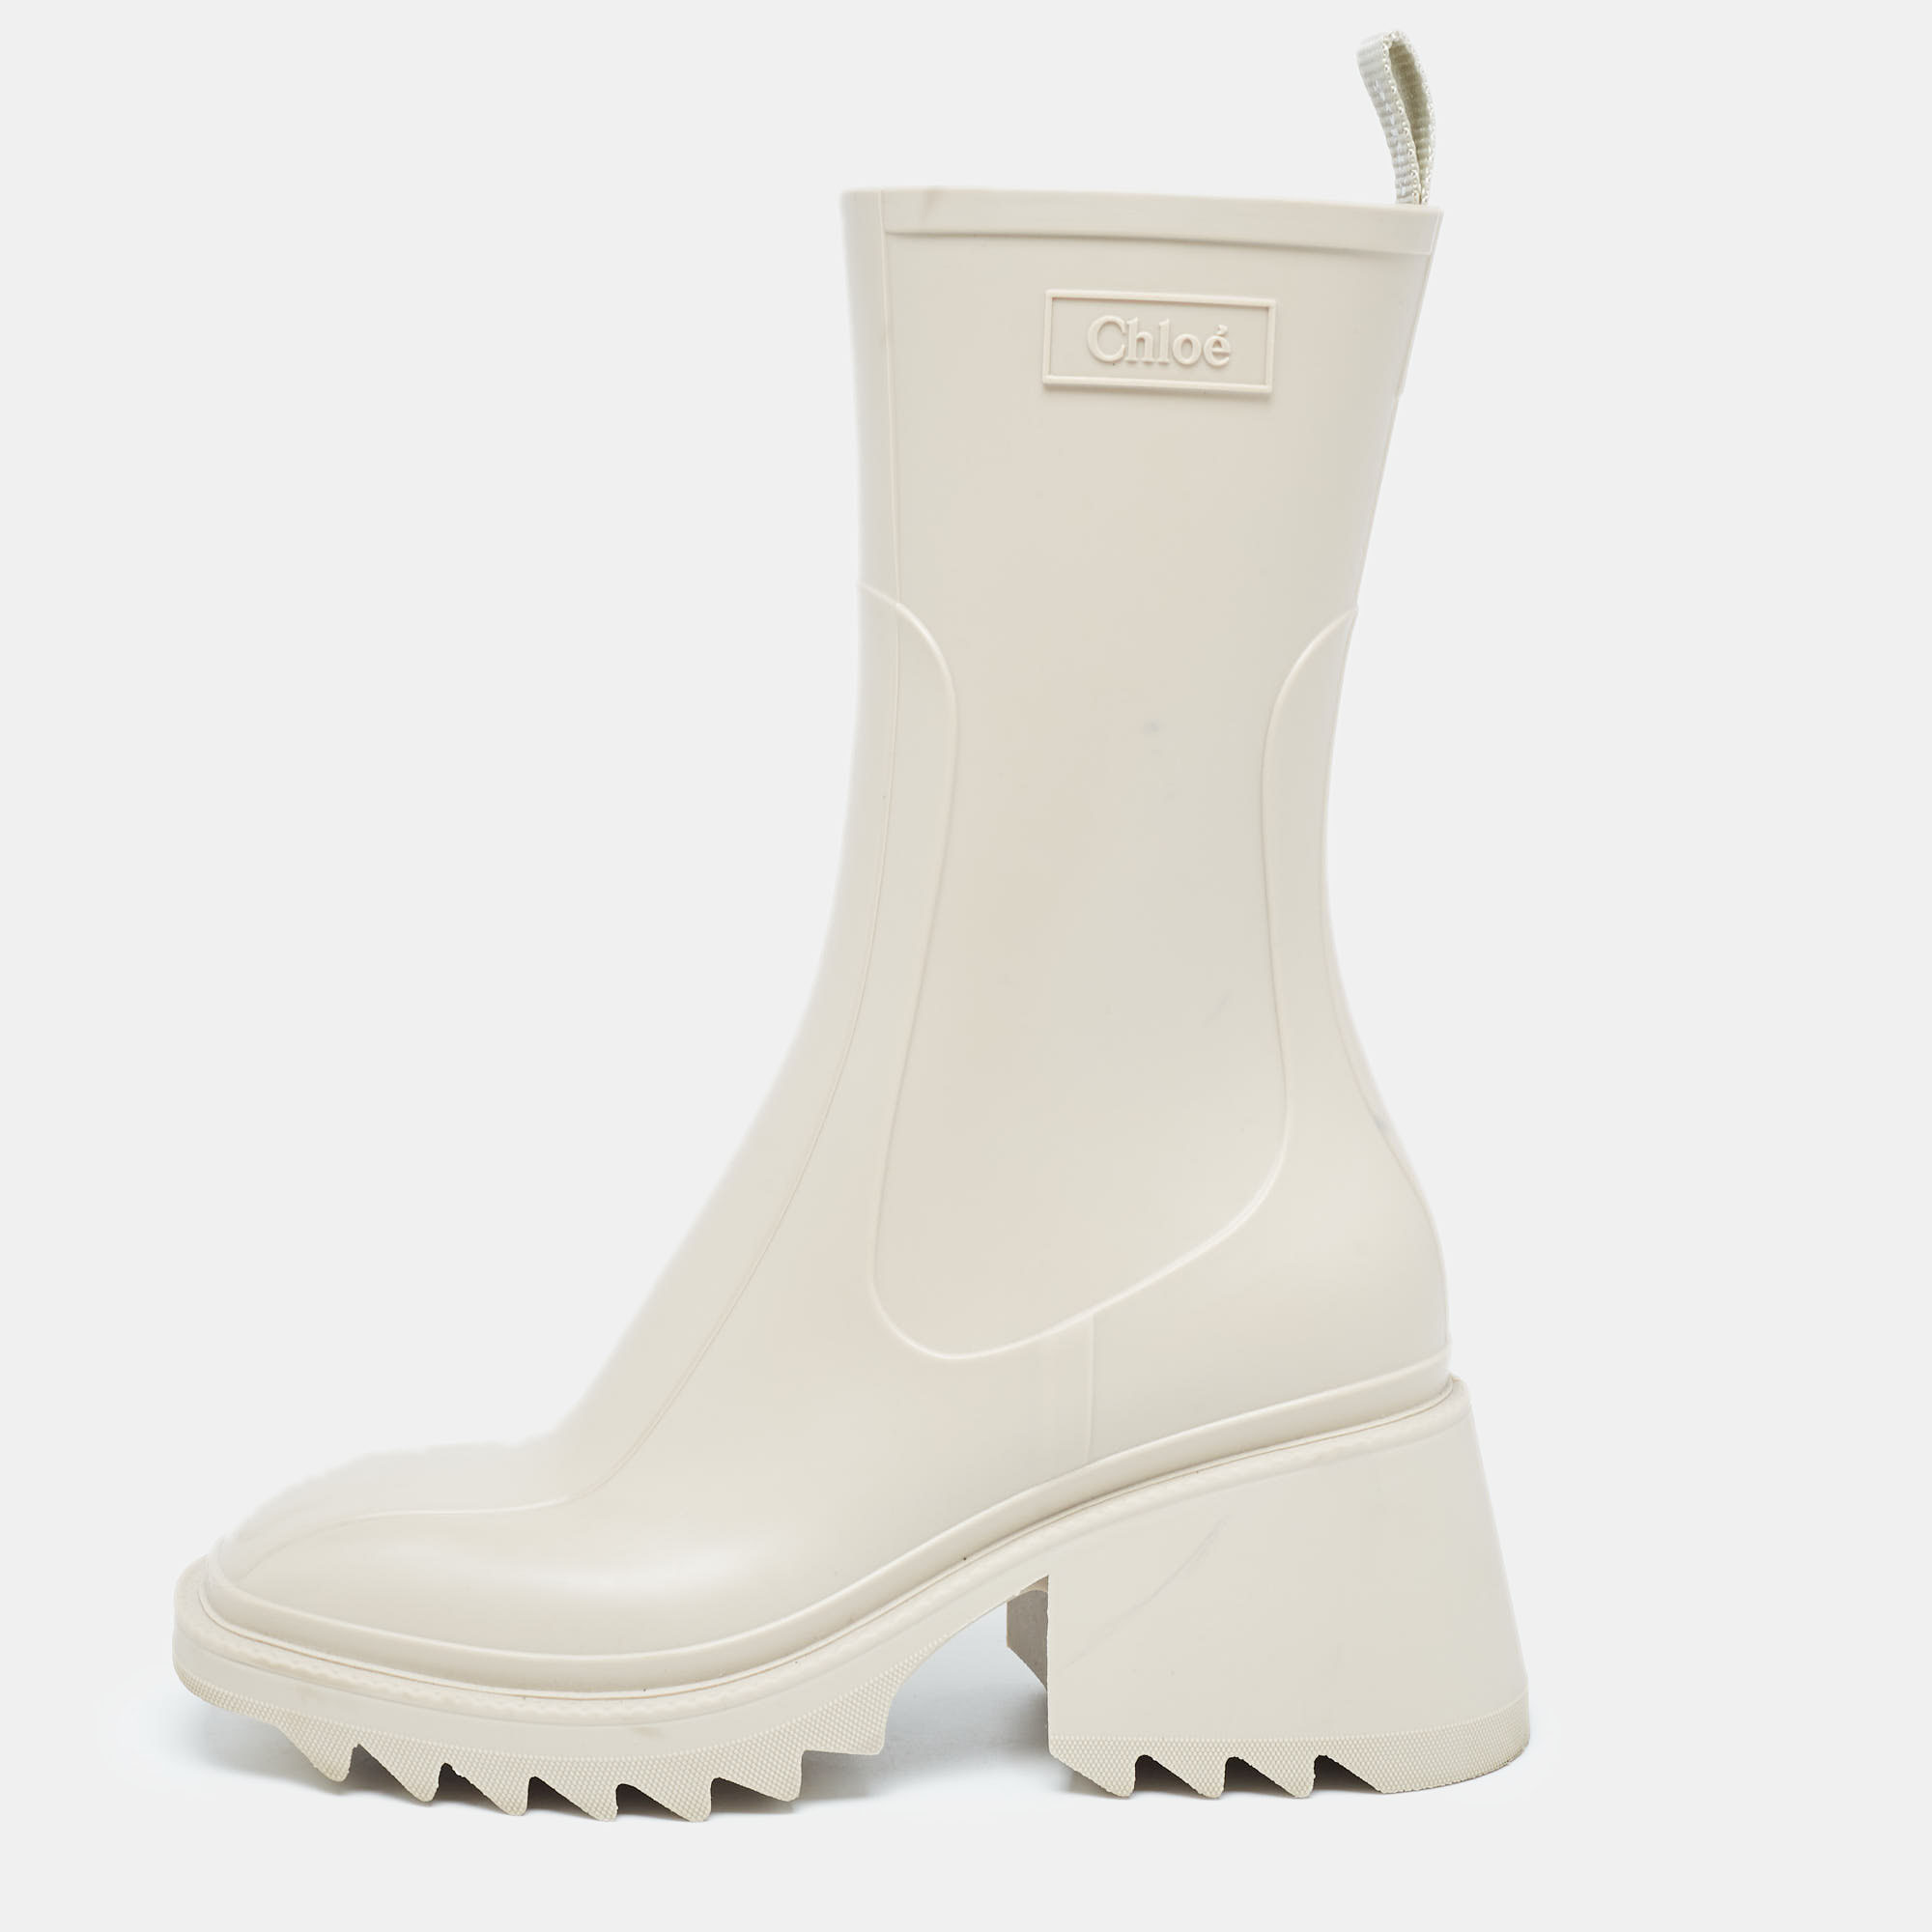 

Chloé Cream Rubber Iuhnr Ankle Boots Size